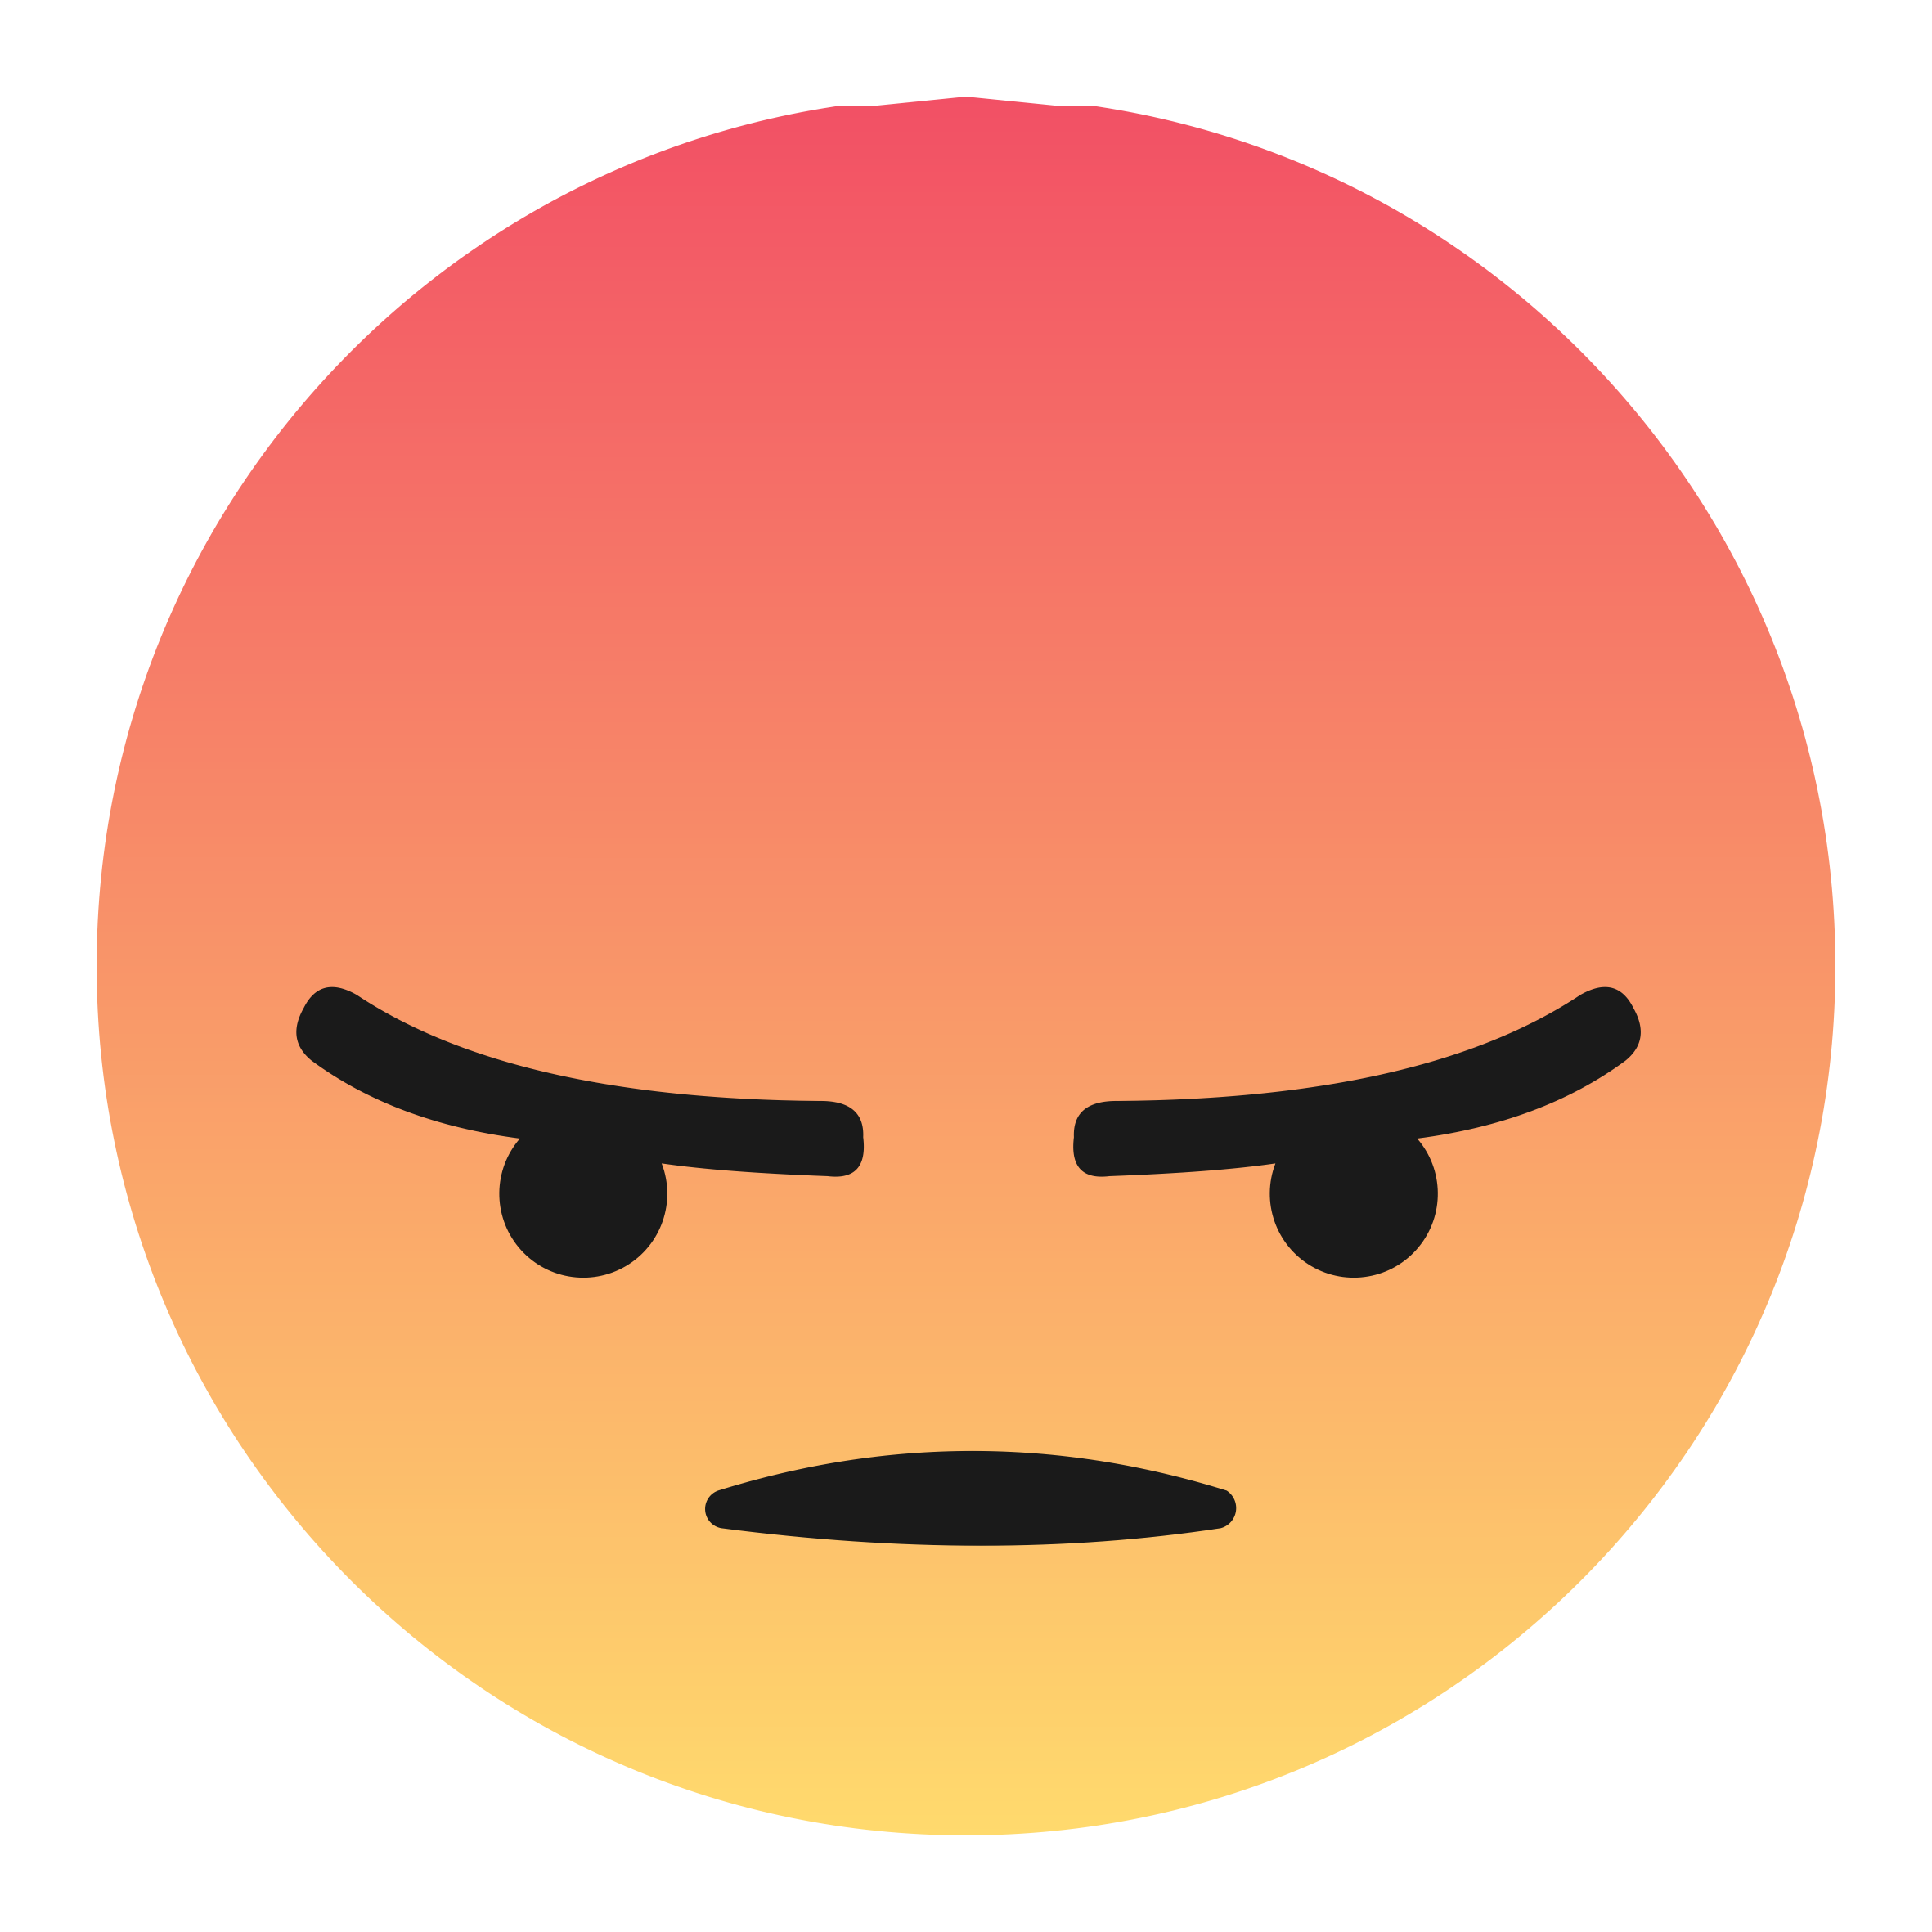 Icons Angry Computer Facebook Anger Emoji PNG Image